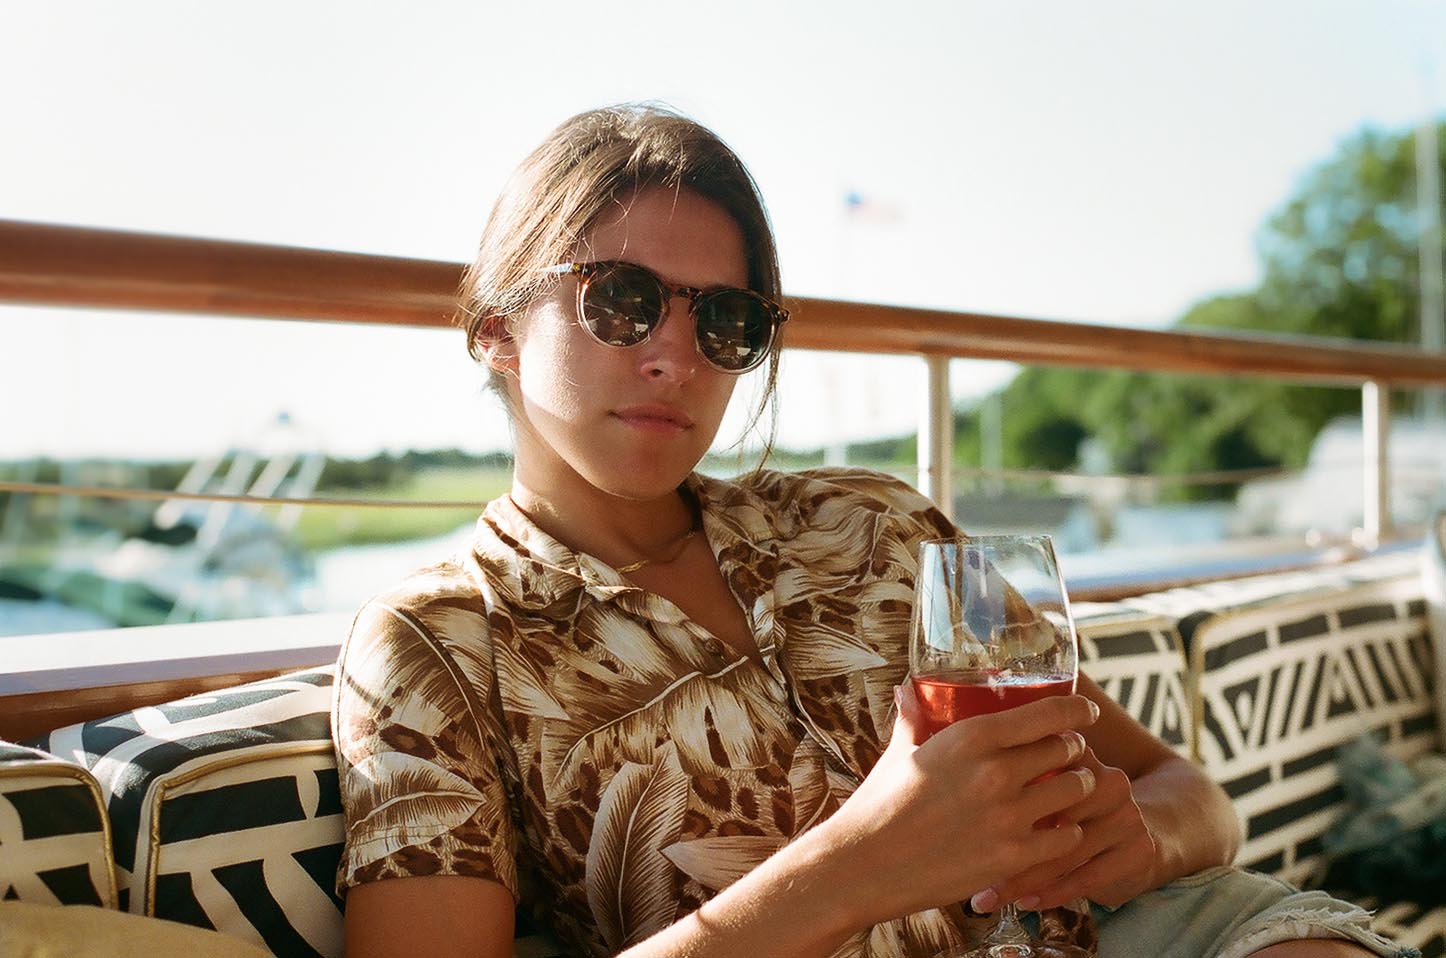 Kelsey with rosé... oysters on the way. Photo: Hunter Orahood.